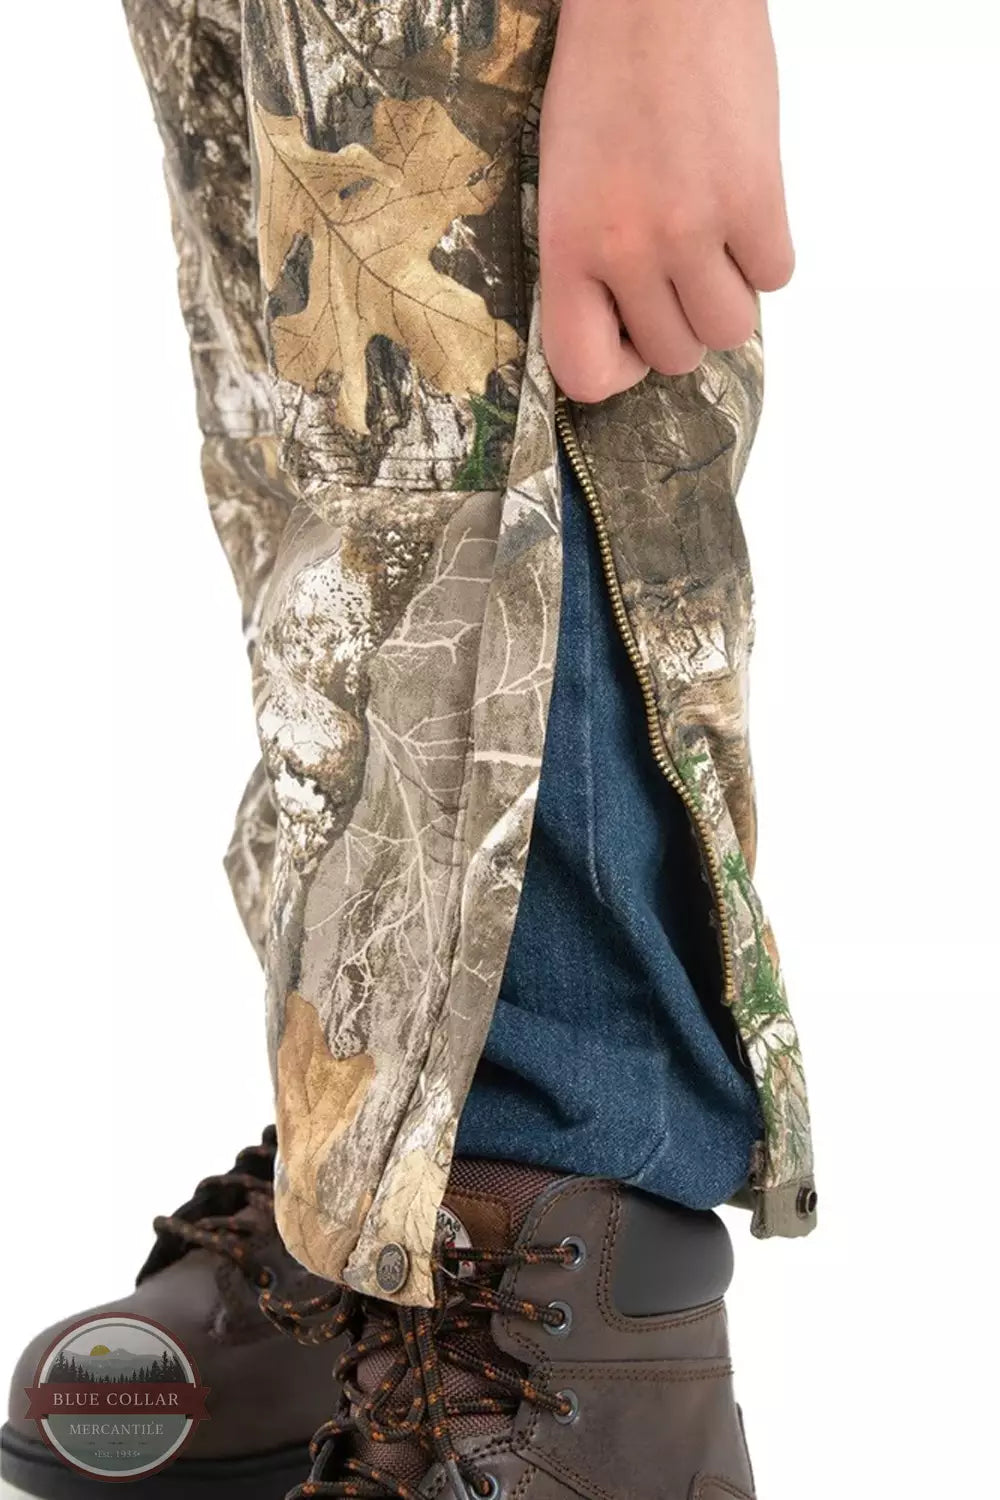 Berne BB21EDG Youth Camo Softstone Insulated Bib Overall Detail View